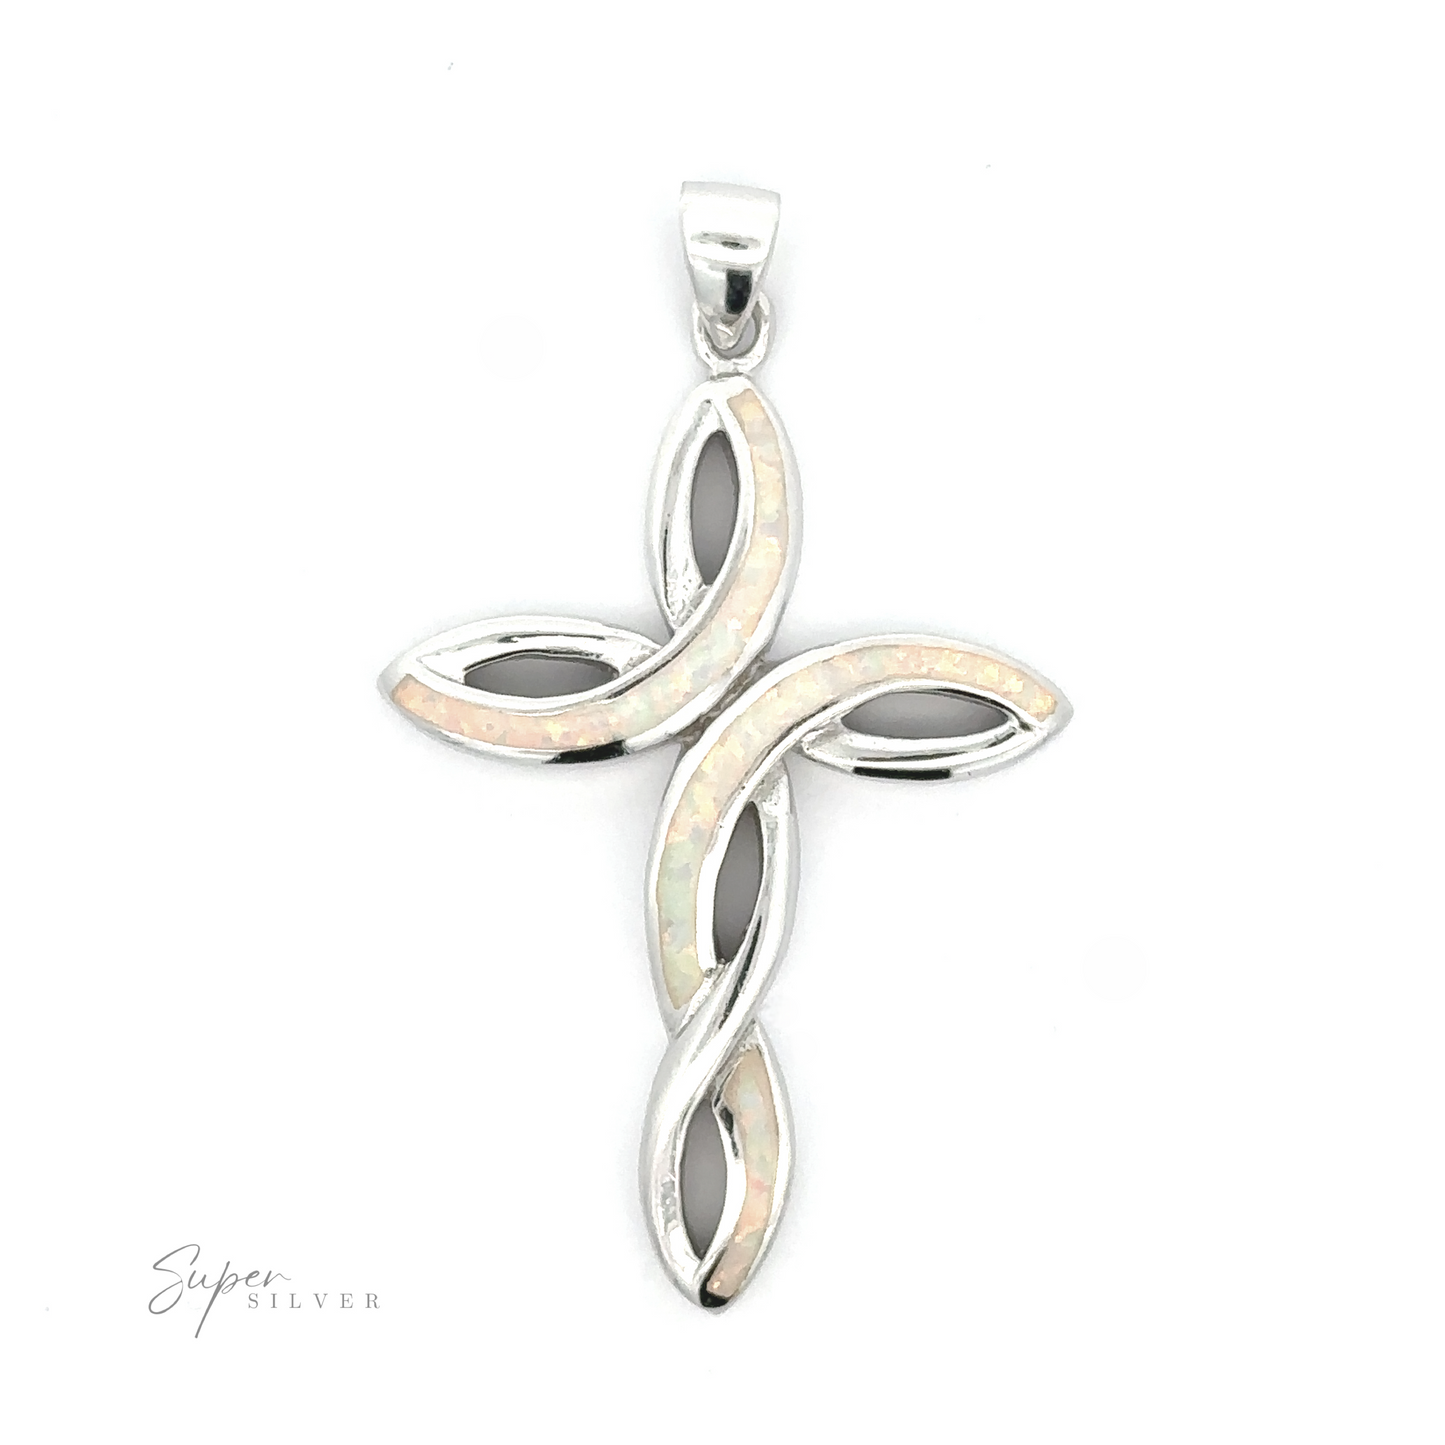 
                  
                    Opal cross pendant with a looping design and inlaid mother-of-pearl accents on a white background.
                  
                